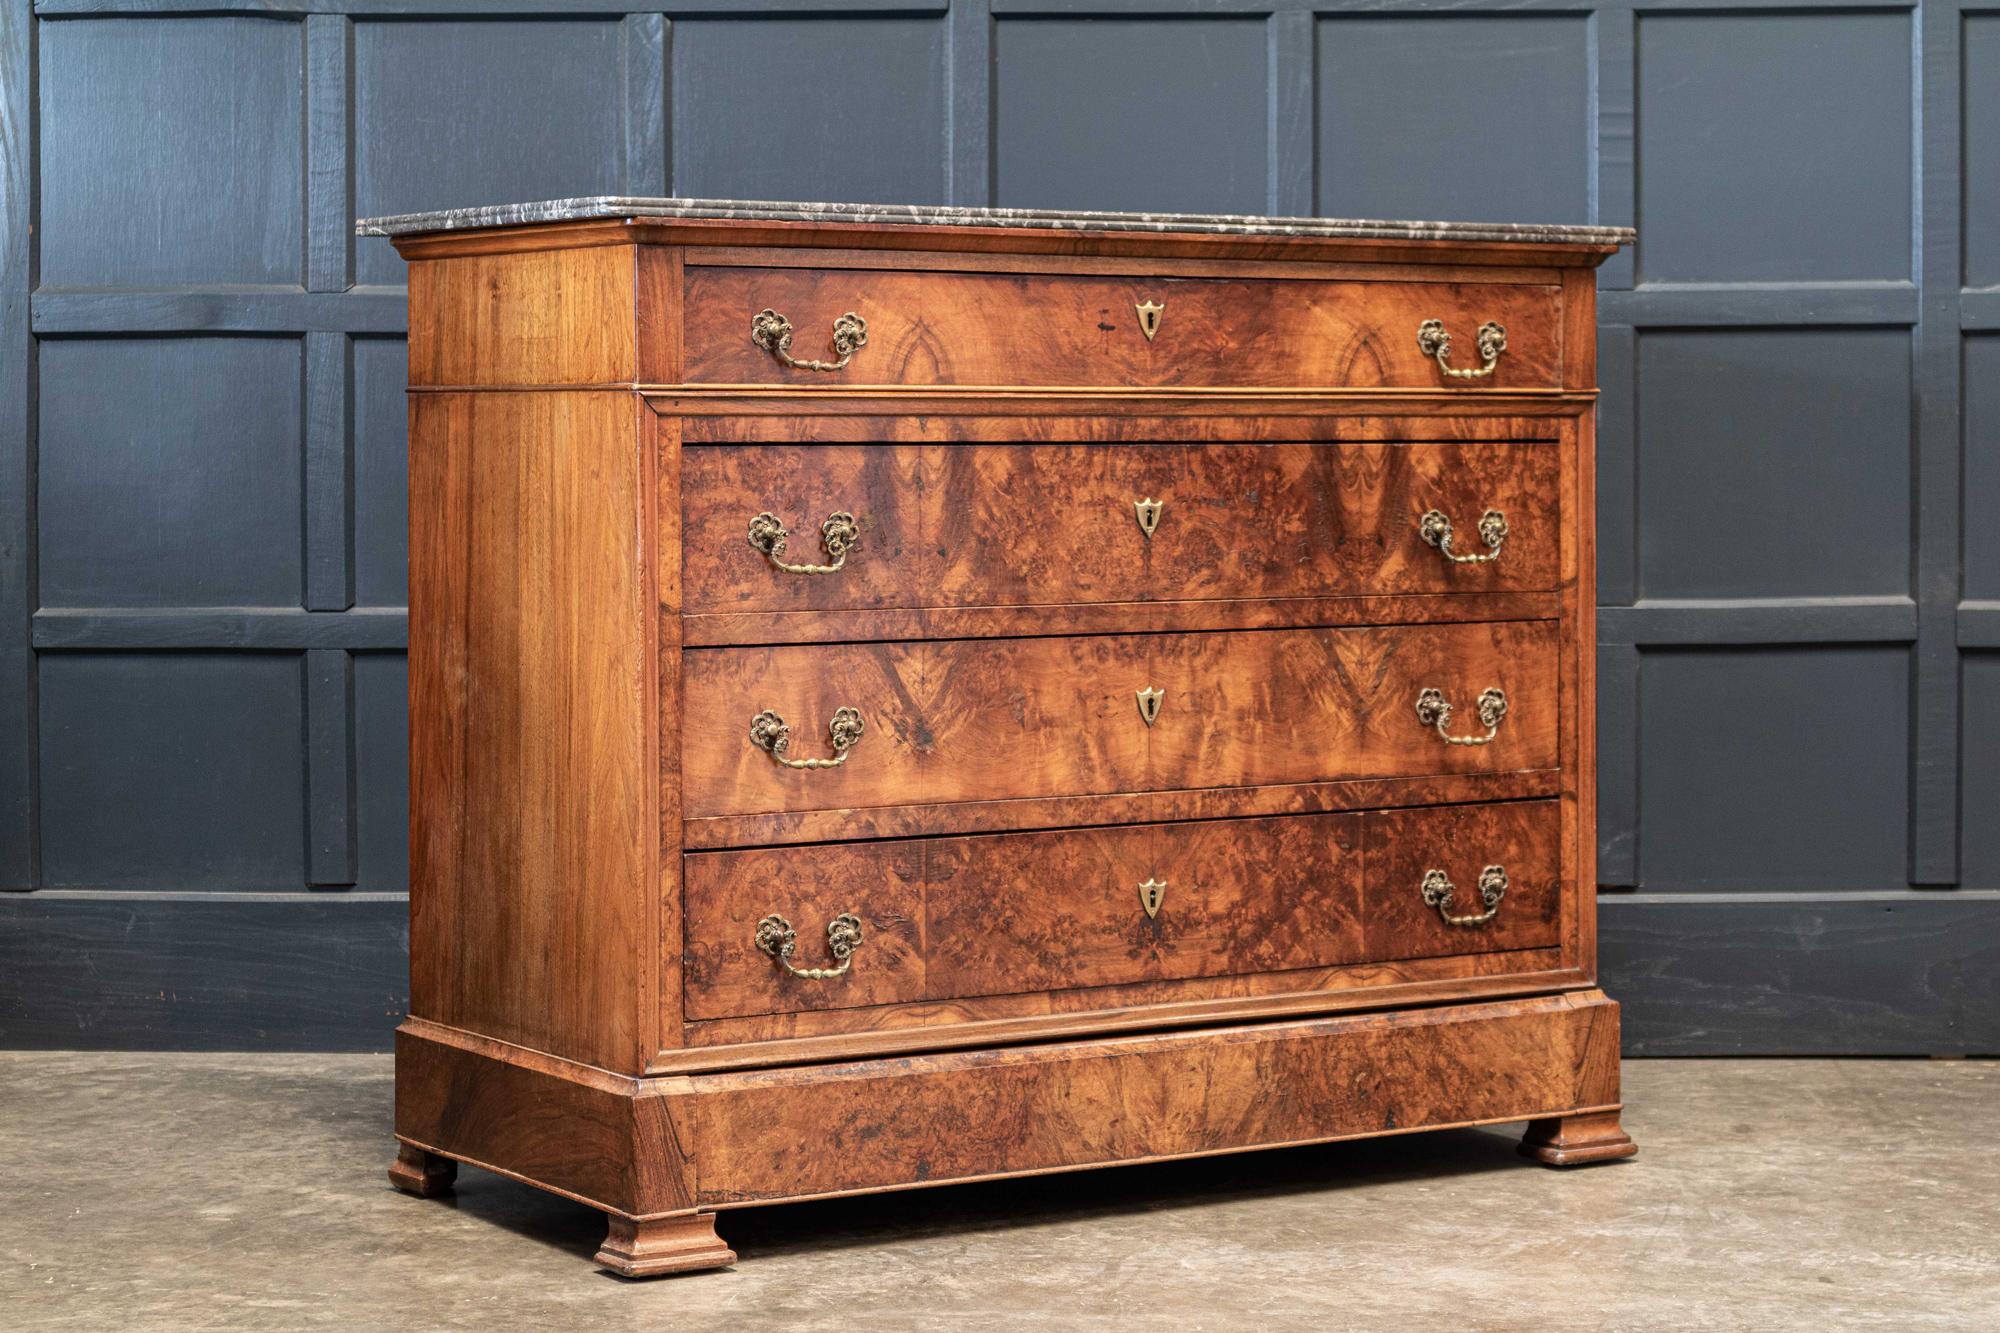 Circa 1860.

19thC large French burr walnut commode with marble top

Sourced from the South of France

 

Measures: W127 x D57.5 x H102.5cm.